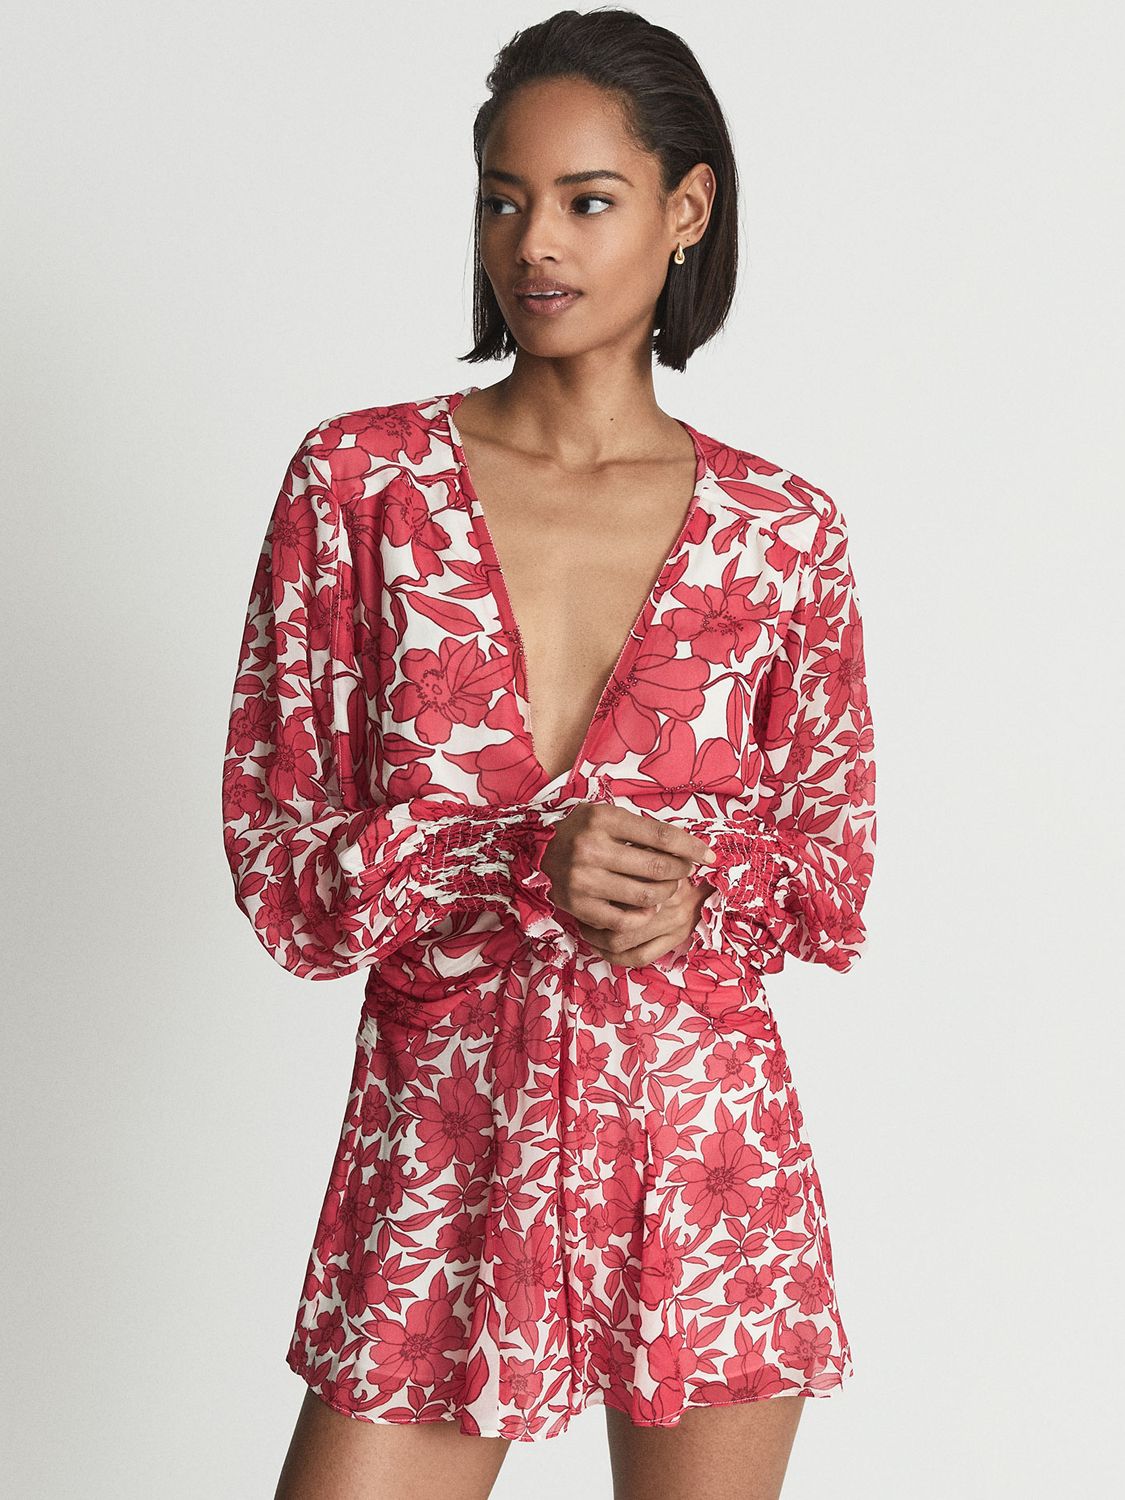 Reiss Summer Floral Playsuit, Coral